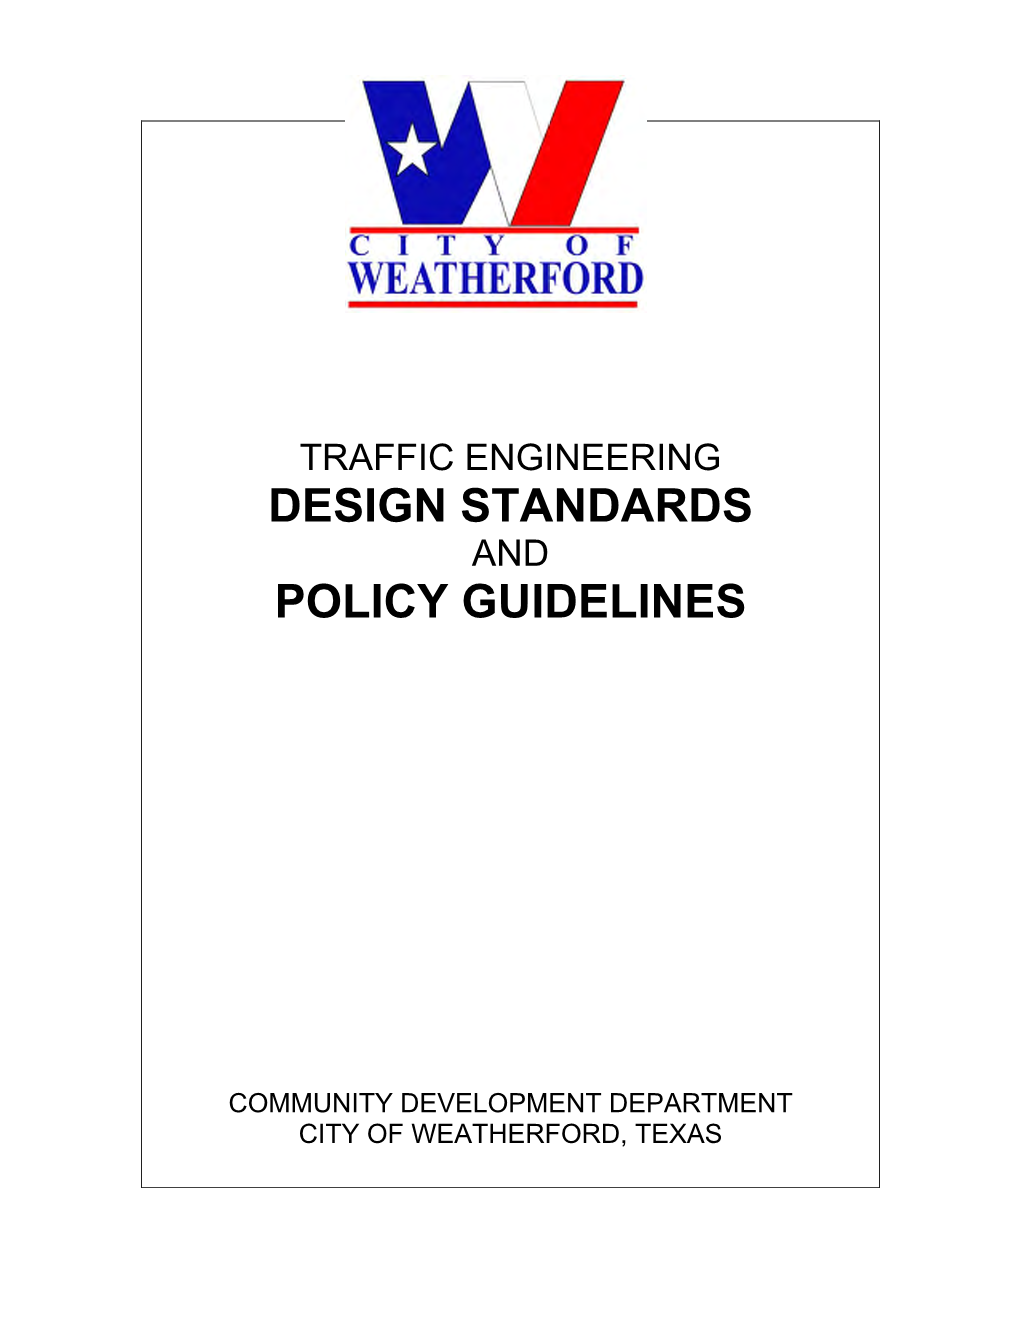 Design Standards Policy Guidelines